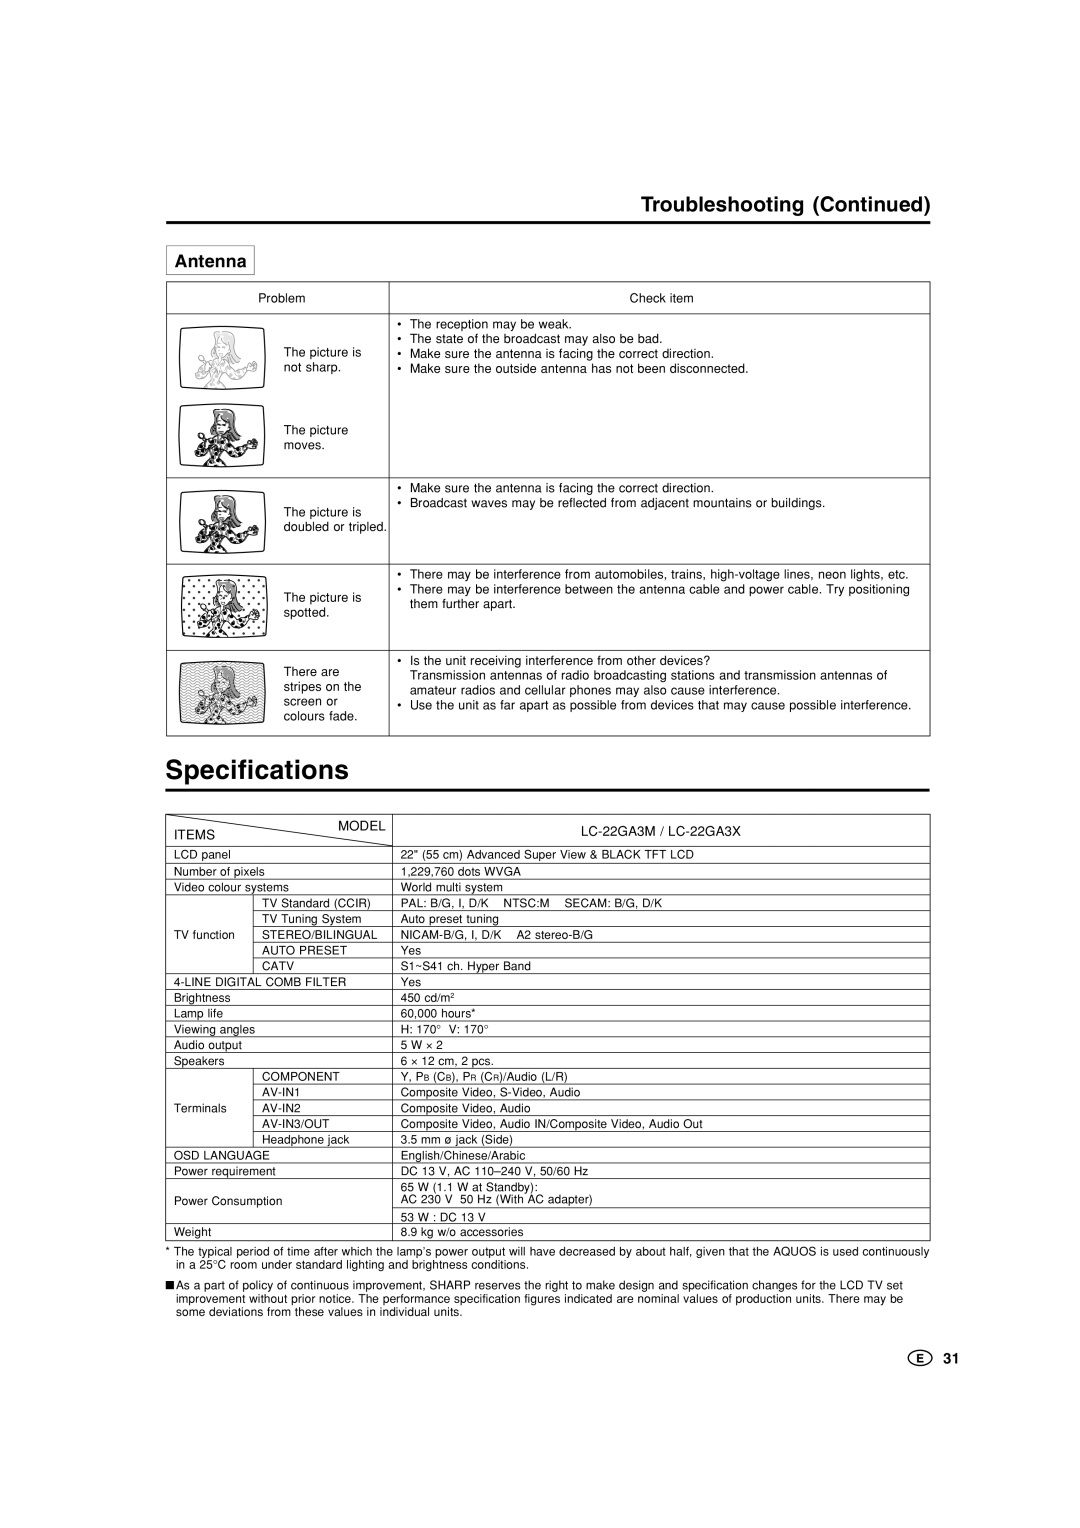 Sharp LC-22GA3X, LC-22GA3M operation manual Specifications, Troubleshooting Continued, Antenna 